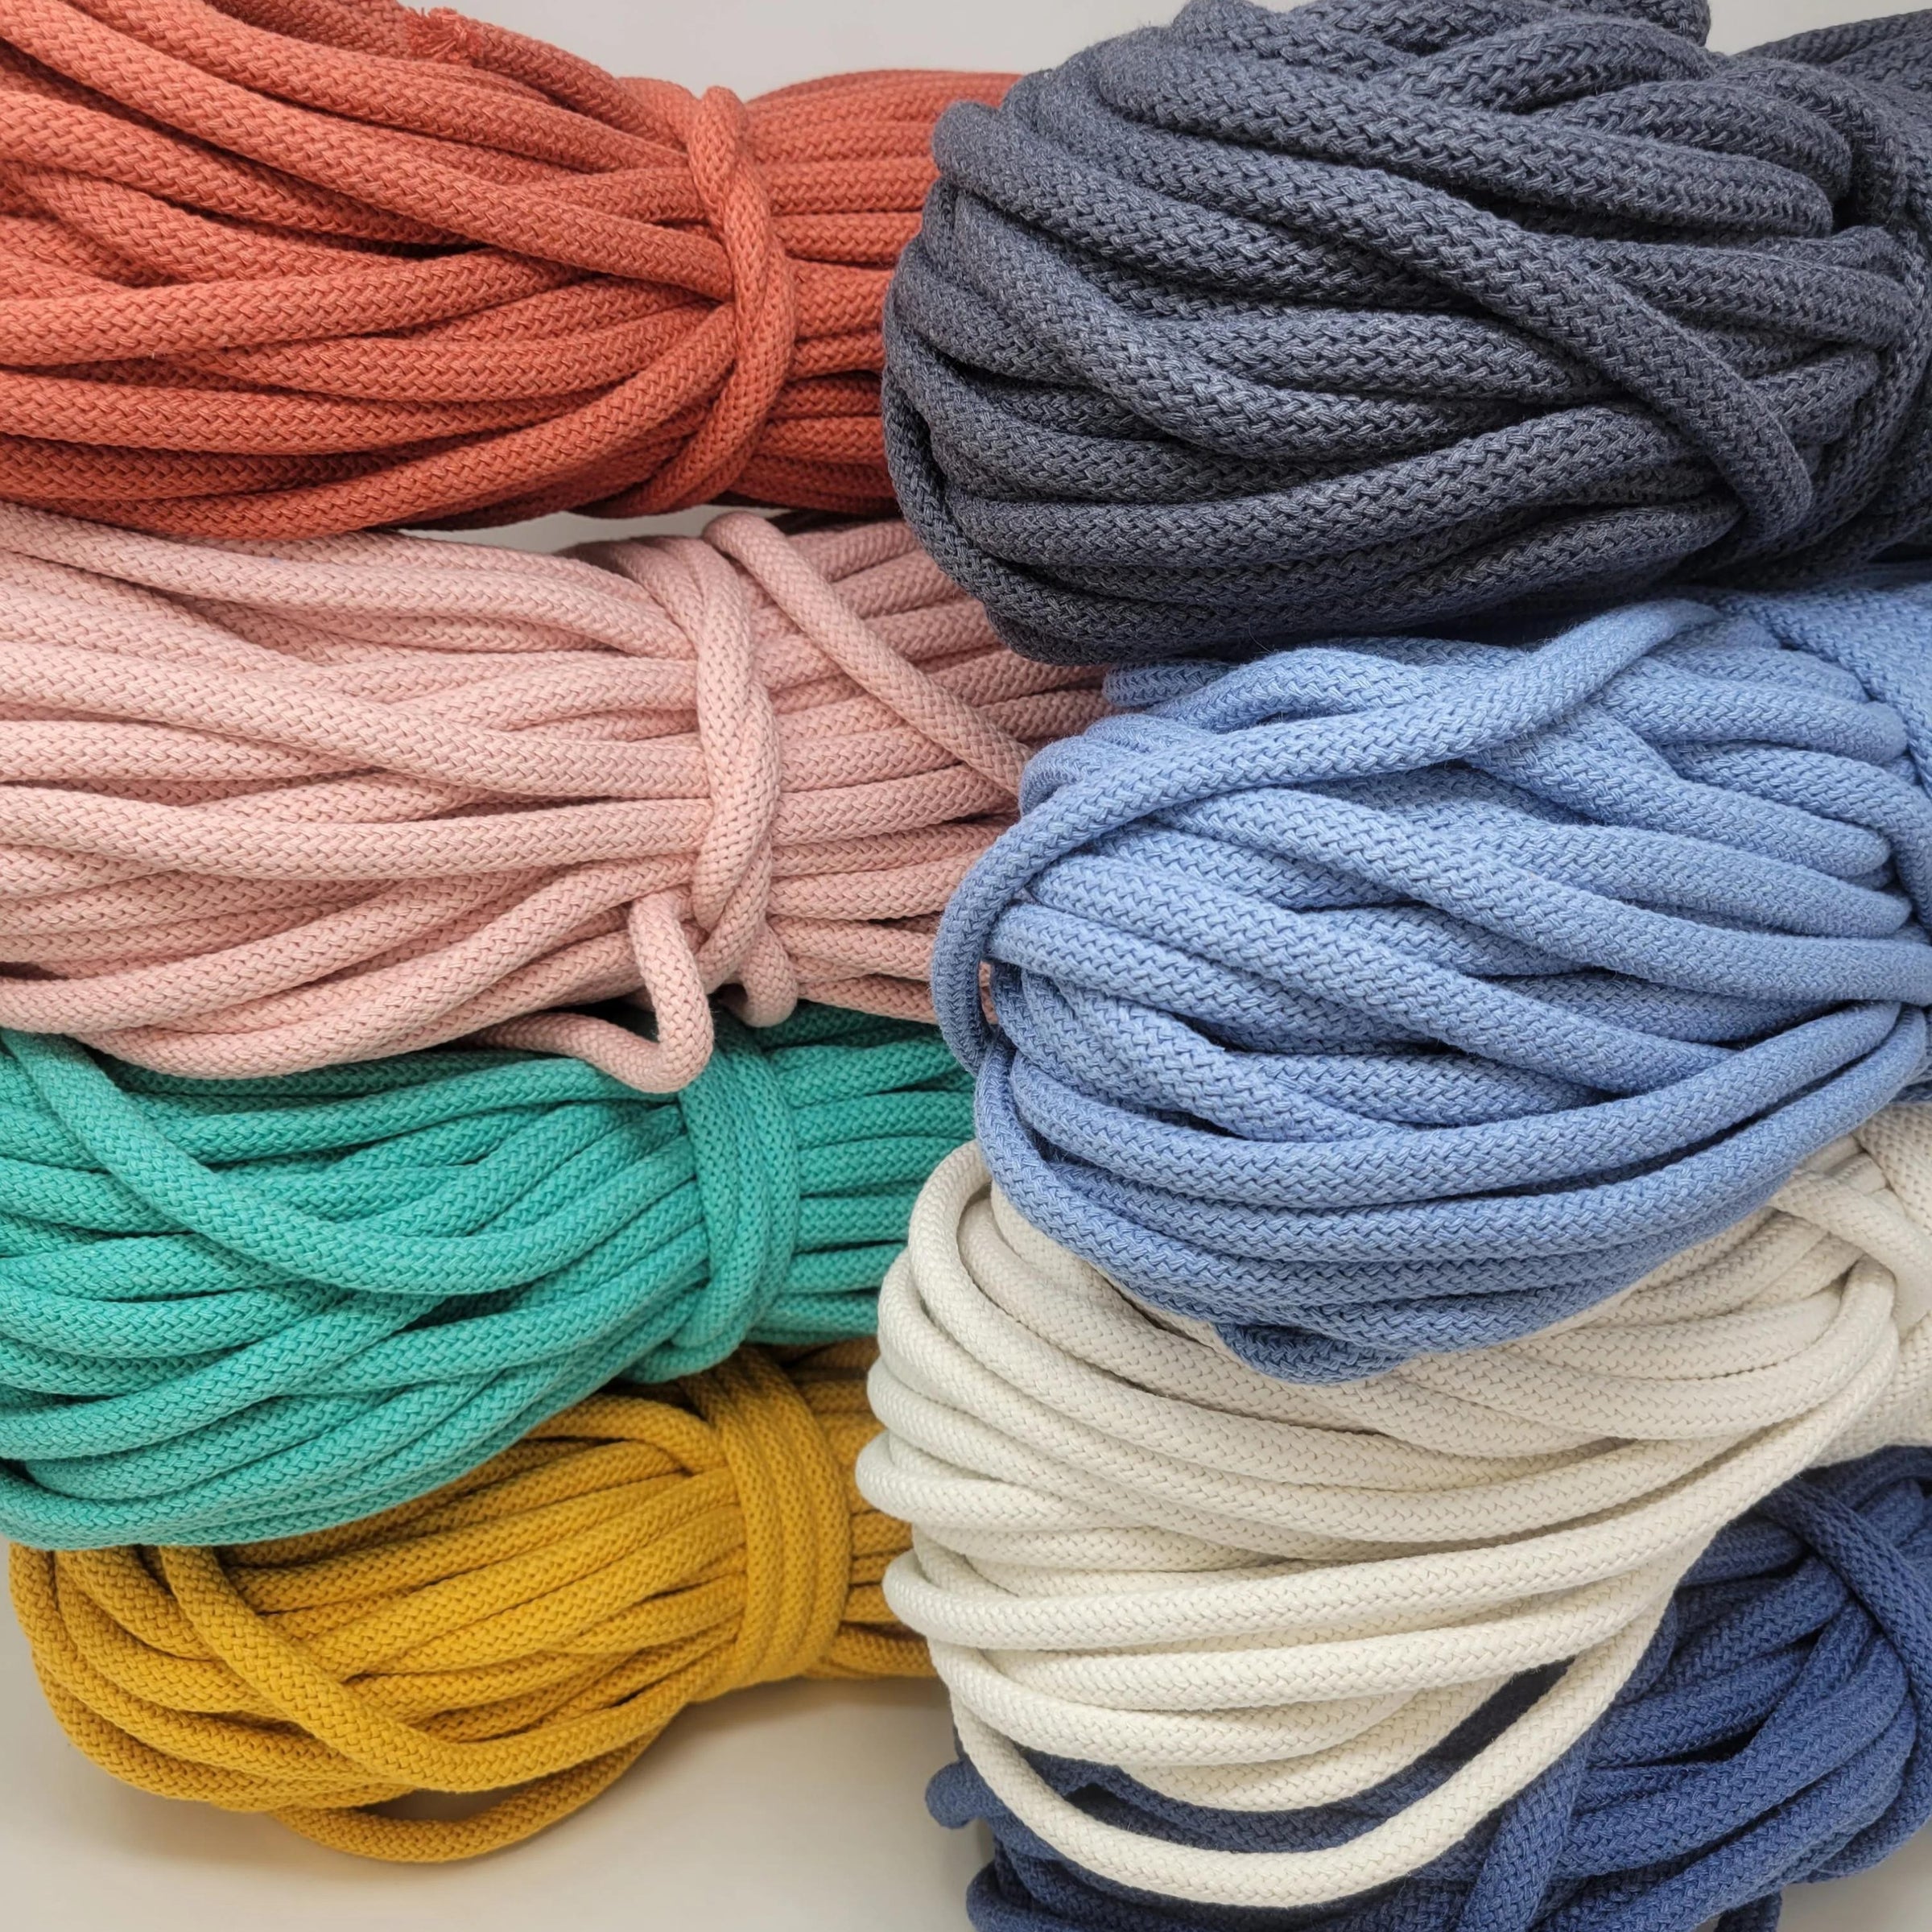 China Factory Macrame Cotton Cord, Twisted Cotton Rope, for Wall